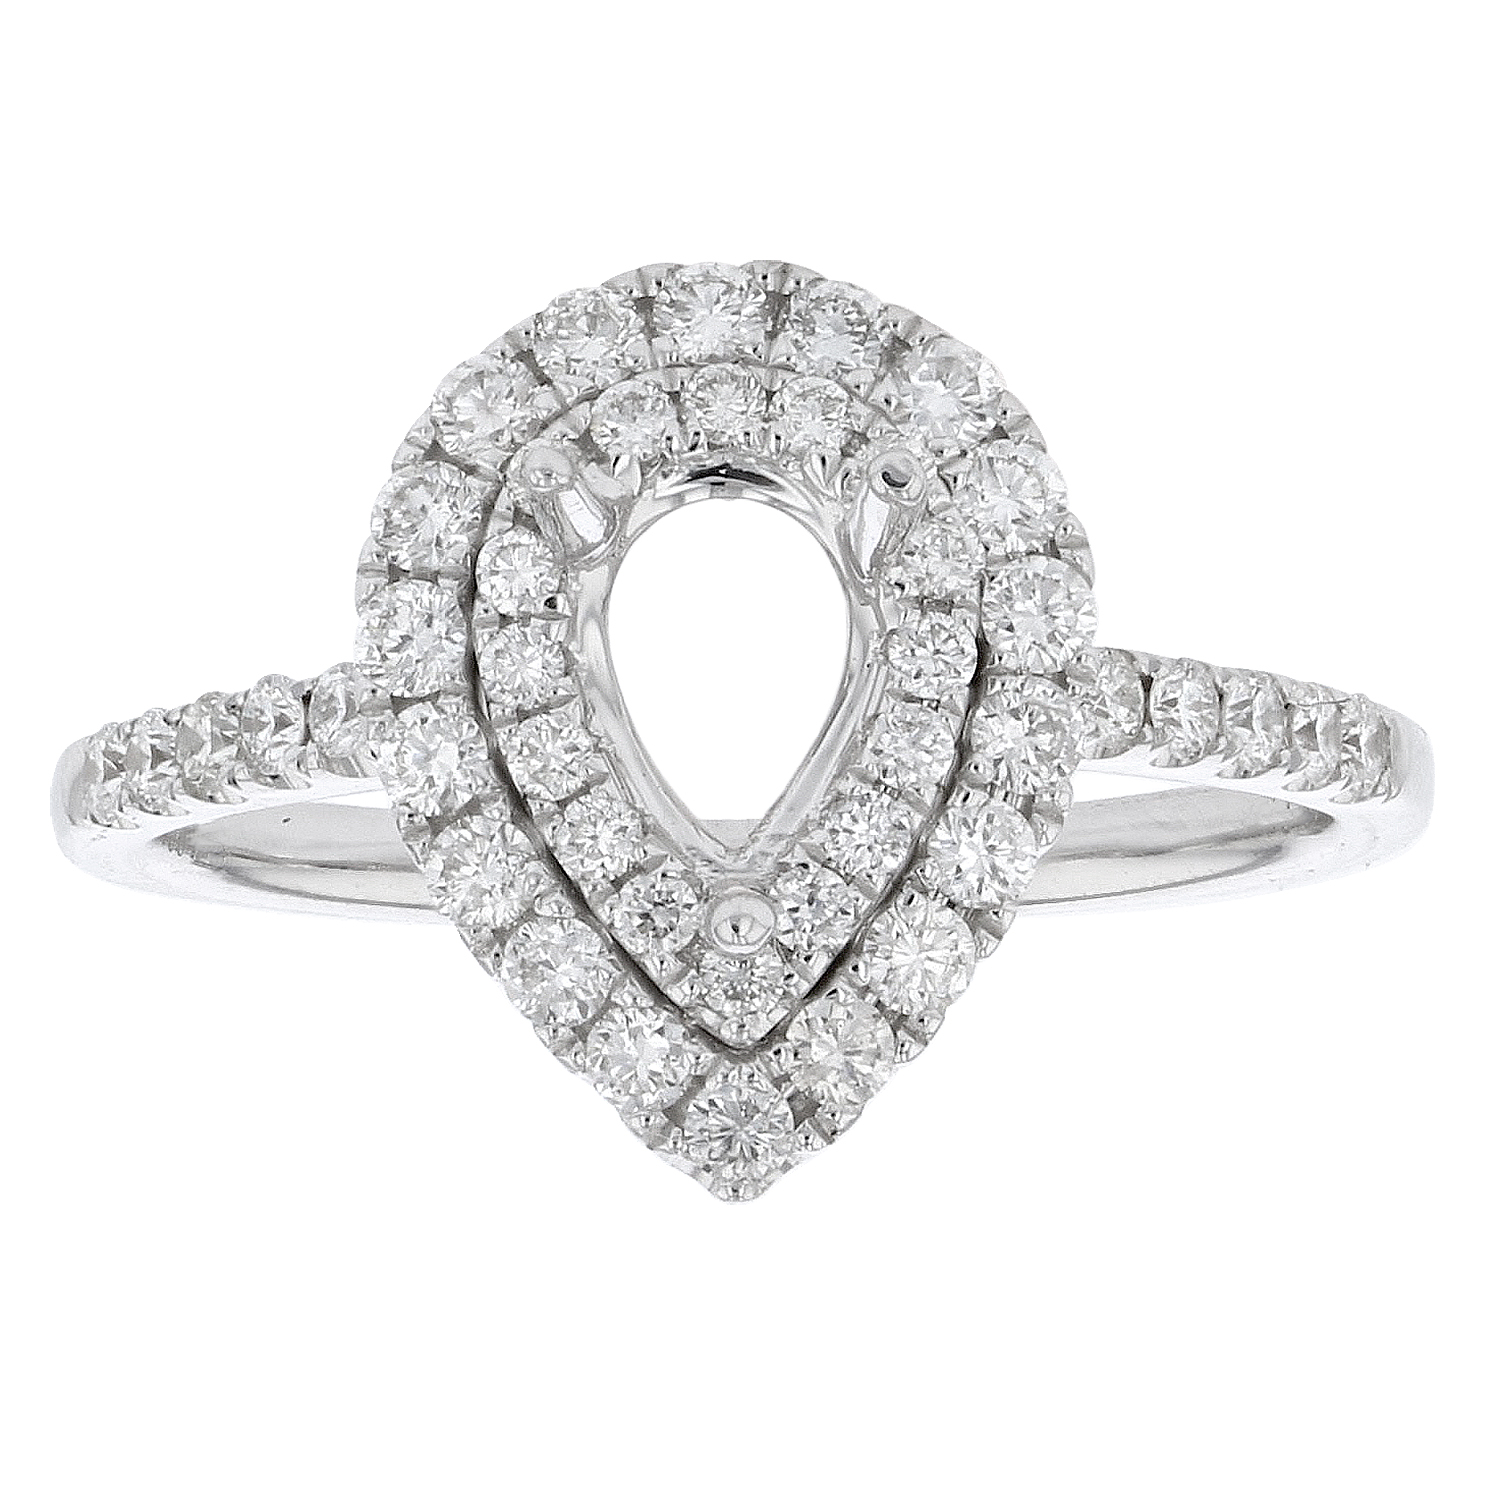 View 0.59ctw Diamond Semi Mount Engagement Ring in 18k White Gold